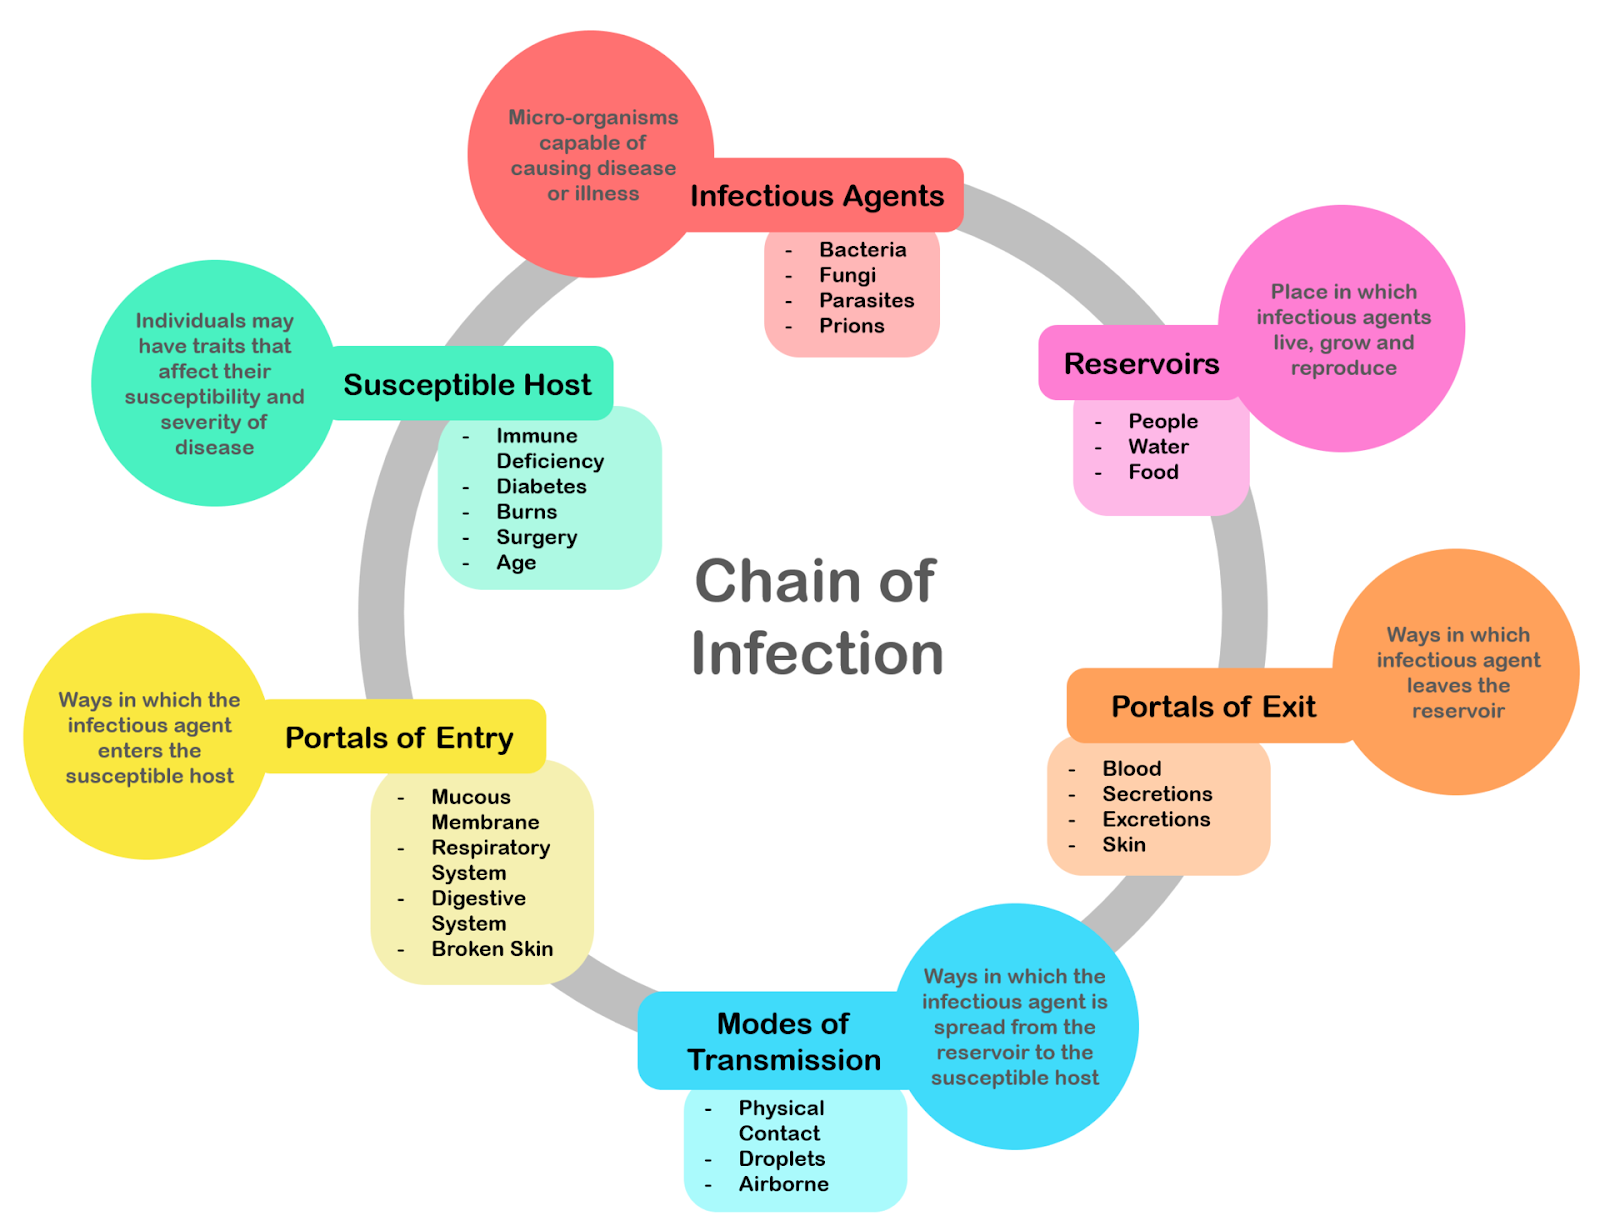 The infographic titled “Chain of Infection” is made up of 6 components. Infectious agents are “micro-organisms capable of causing disease or illness” and include bacteria, fungi, parasites, and prions. Reservoirs are “places in which infectious agents live, grow, and reproduce” and include people, water, and food. Portals of exit are ways in which infectious agents leave the reservoir and include blood, secretious, excretions, and skin. Modes of transmission are “ways in which the infectious agent is spread from the reservoir to the susceptible host” and include physical contact, droplets, and airborne transmission. Portals of entry are ways in which the infectious agent enters the susceptible host” and include mucous membranes, the respiratory system, the digestive system, and broken skin. Susceptible hosts are “individuals that may have traits that affect their susceptibility and severity of disease”. These traits include immune deficiency, diabetes, burns, surgery, and age.